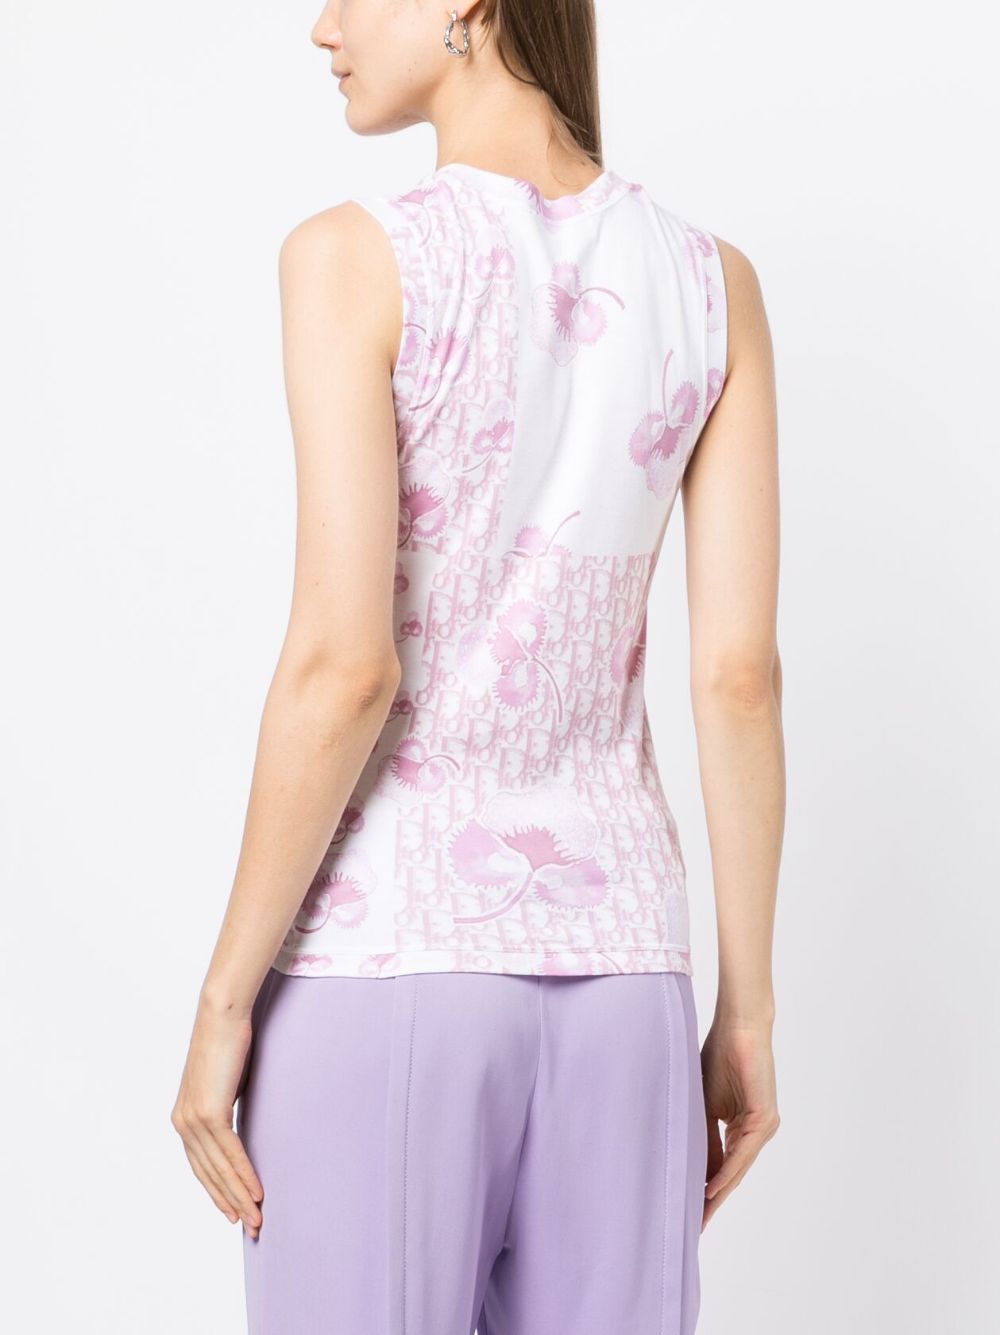 Christian Dior Trotter Monogram Embroidered Floral Tank Top